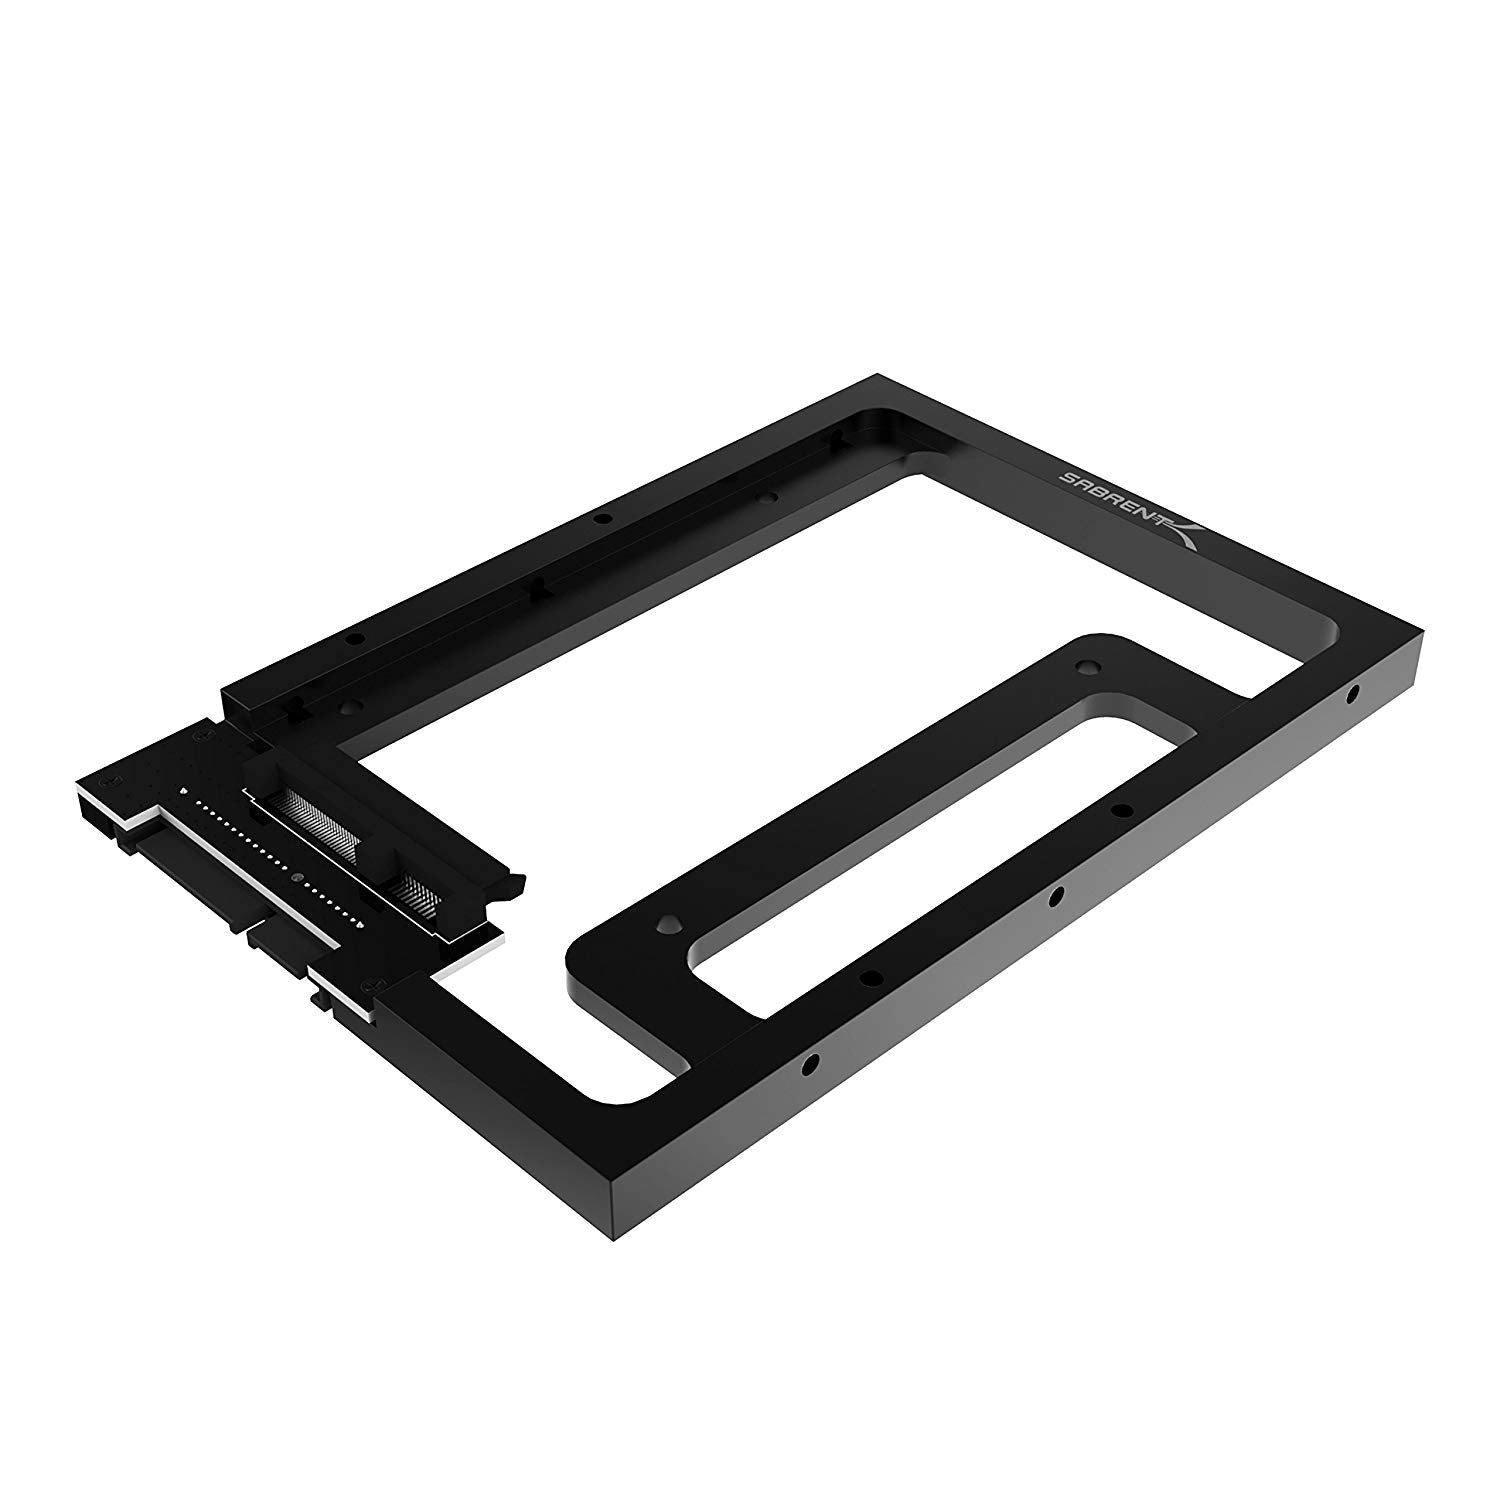 Sabrent BK-PCBS 2.5" to 3.5in SSD HDD Hard Dirve Bay Converter Mounting Kit